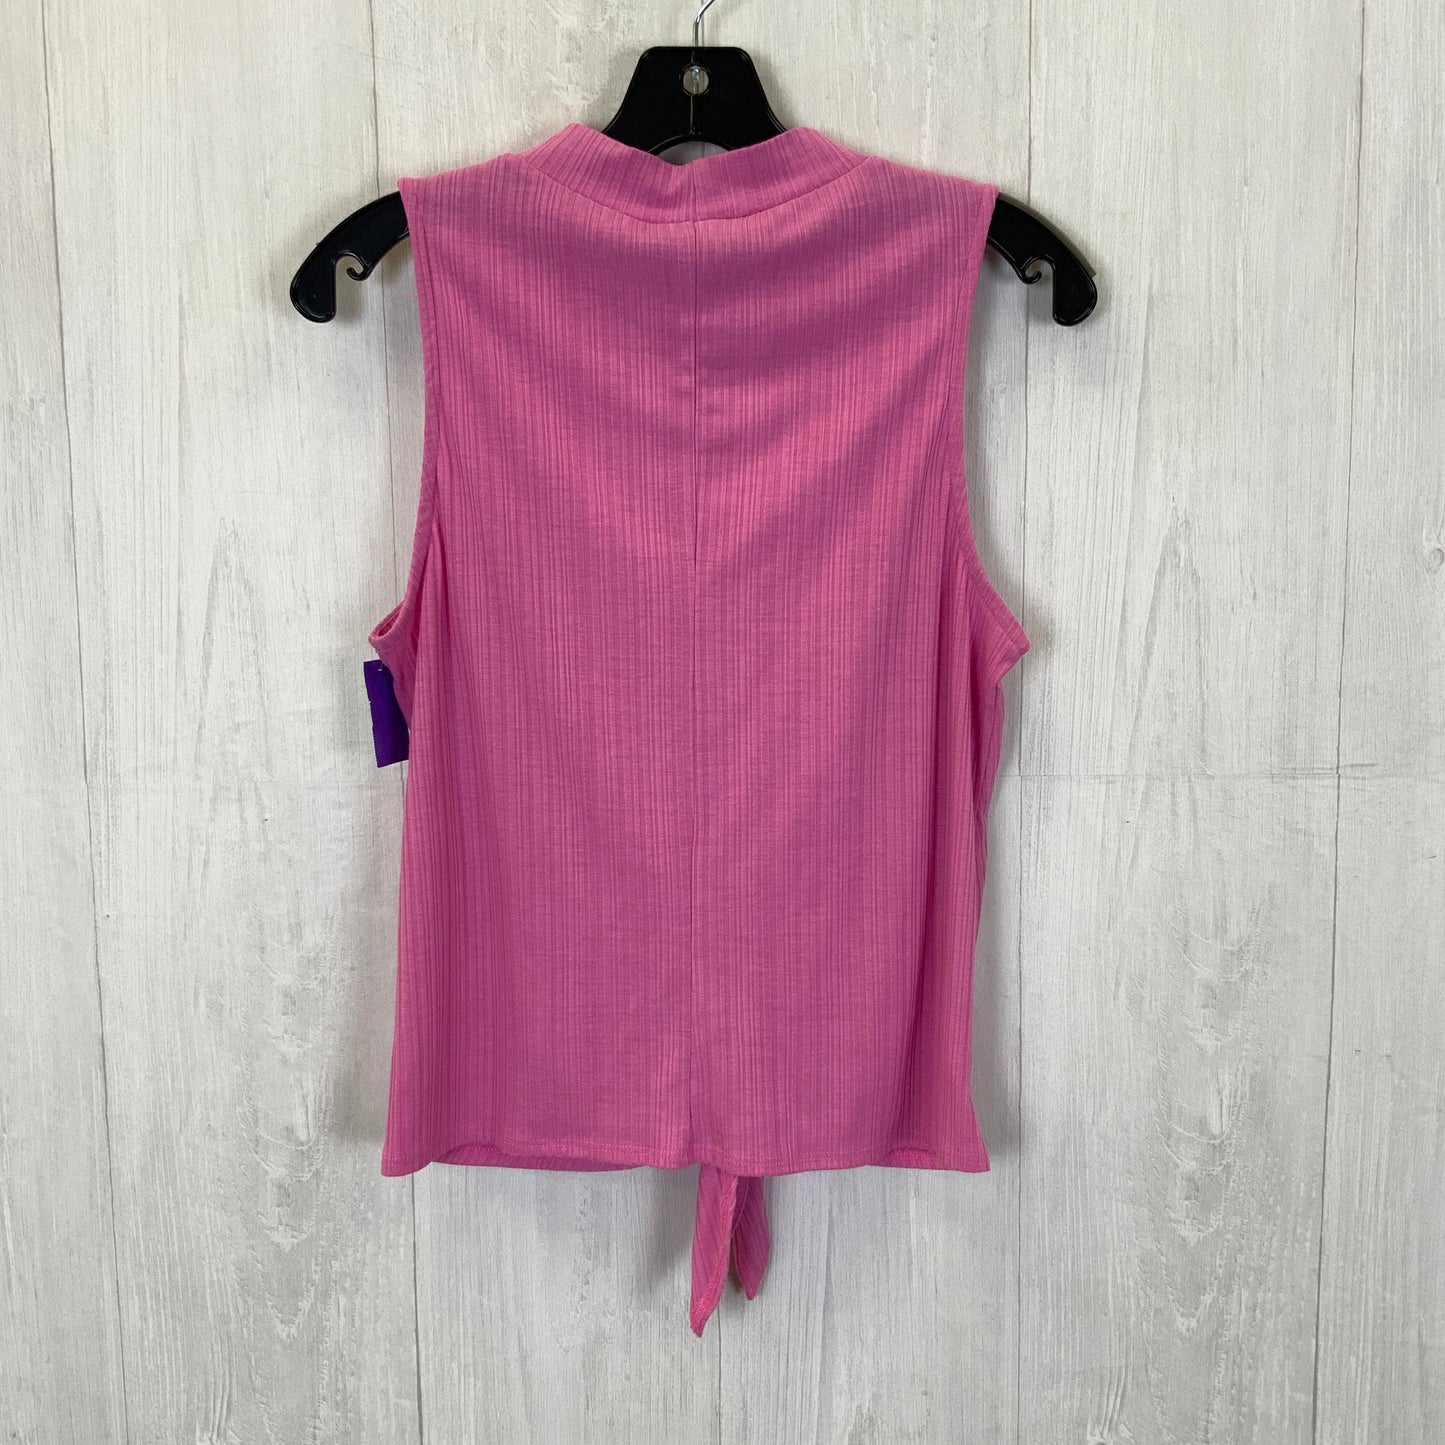 Top Sleeveless Basic By W5  Size: M